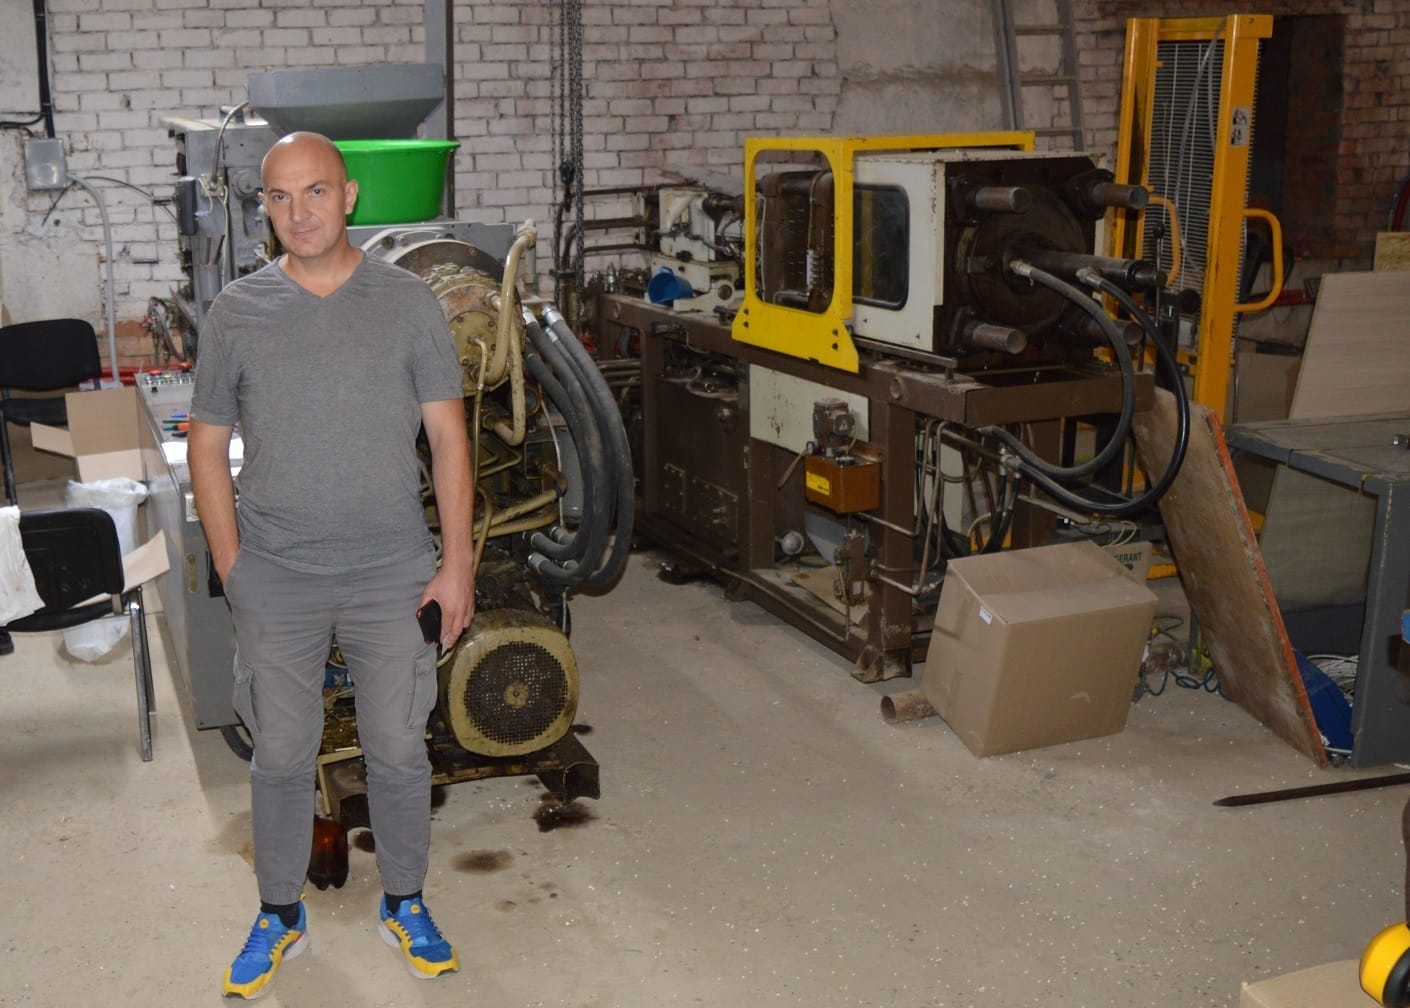 Assembled in the assembly shop of the relocated business and business owner Ruslan Sadovskyi